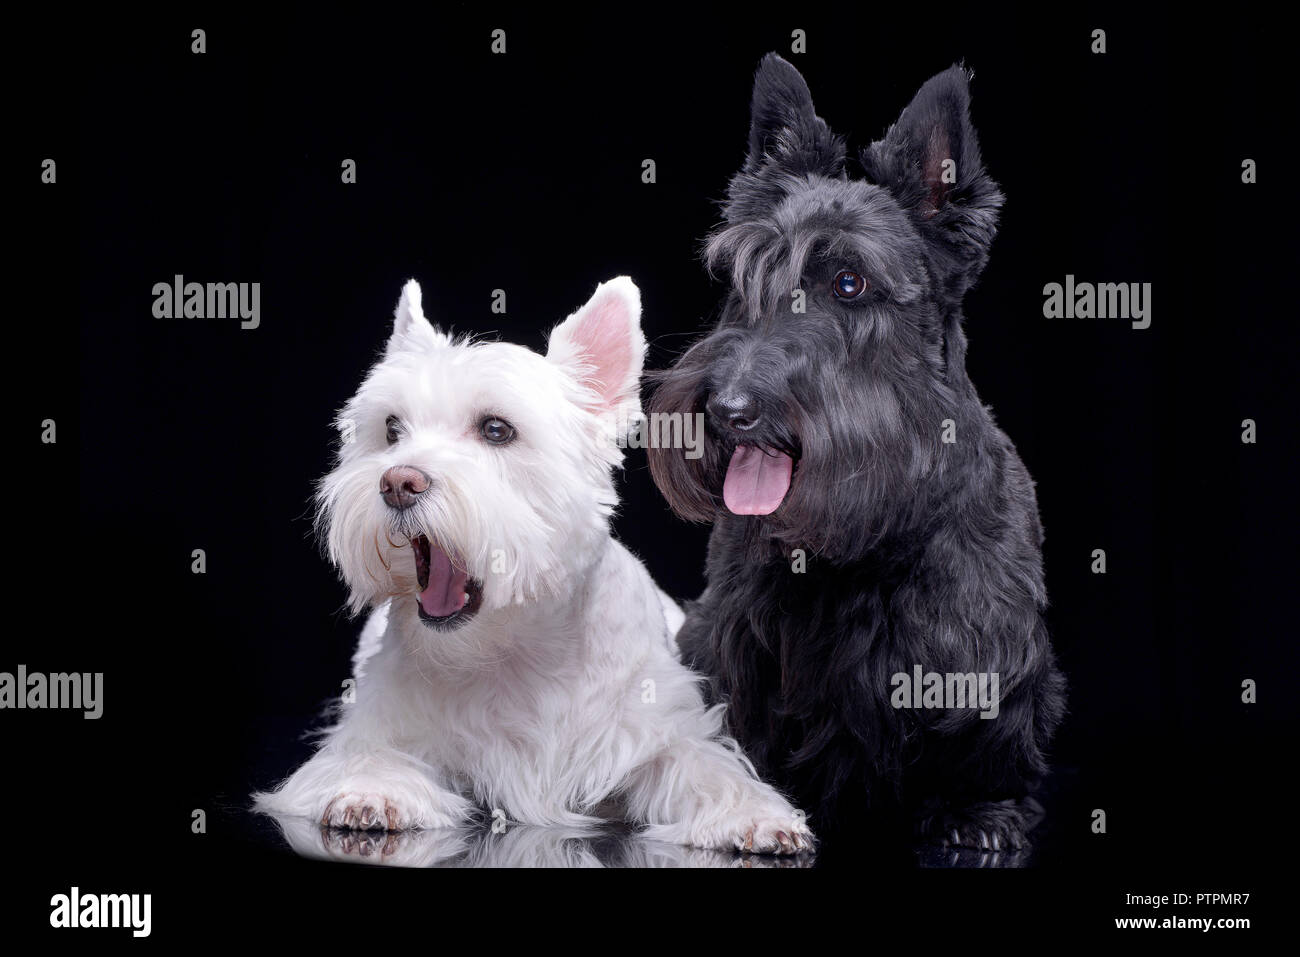 Studio Shot Of An Adorable West Highland White Terrier And A Scottish Terrier Lying On Black Background Stock Photo Alamy